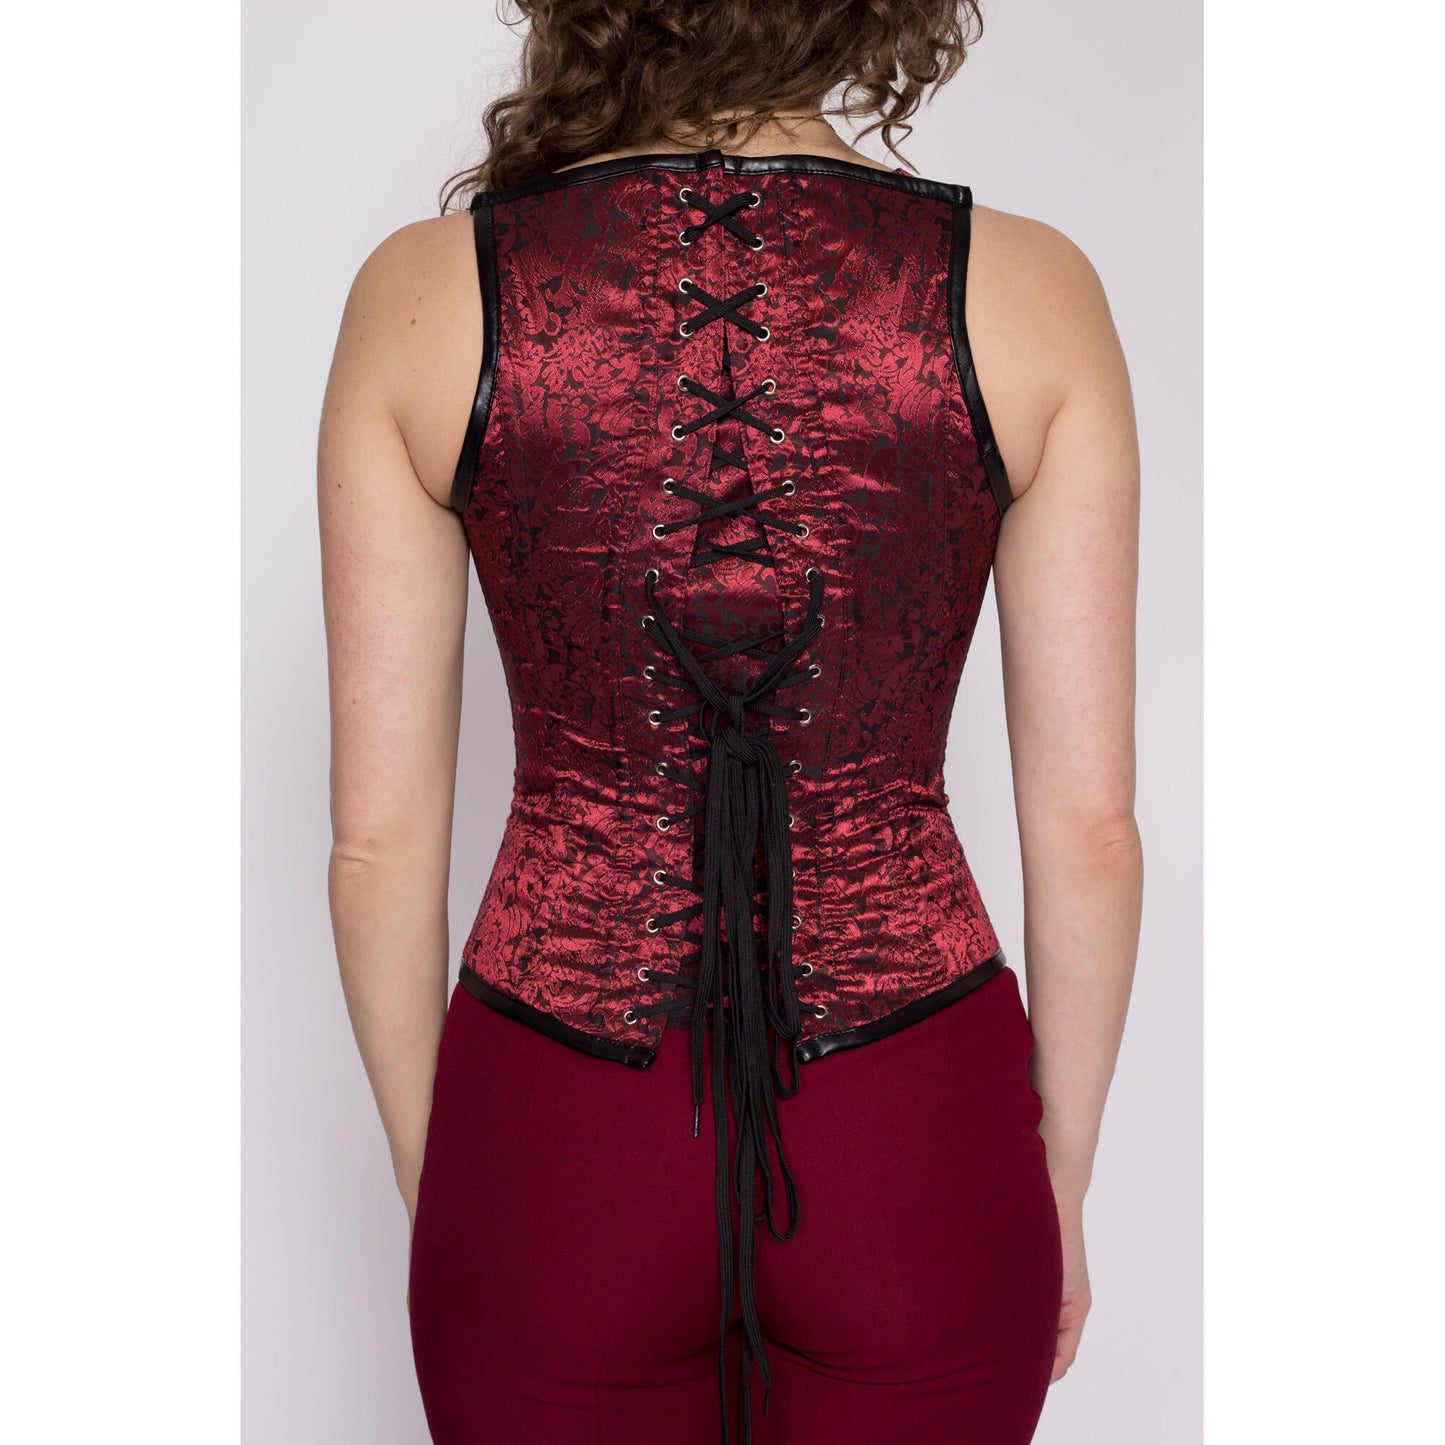 Sm-Med Red Satin Jacquard Corset Bustier | Vintage Y2K Gothic Lace Up Tank Top